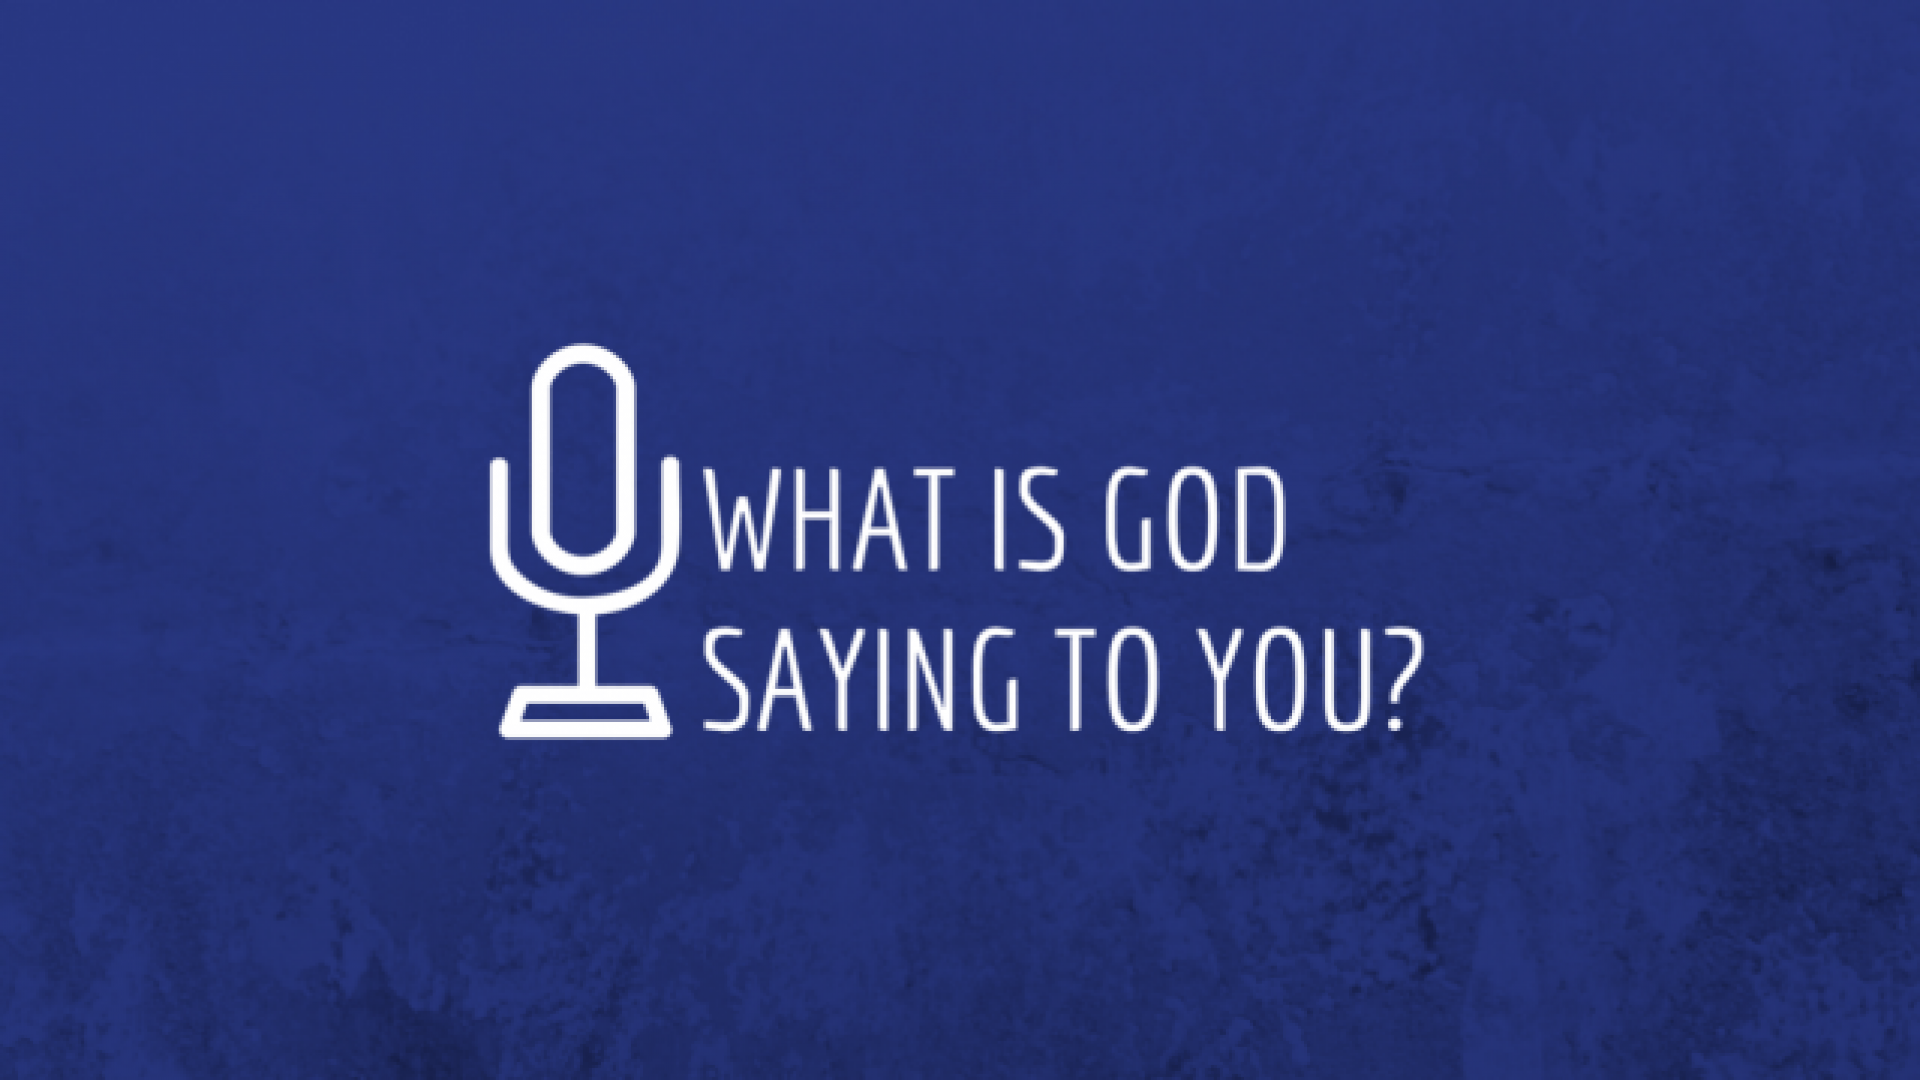 WHAT IS GOD SAYING TO YOU